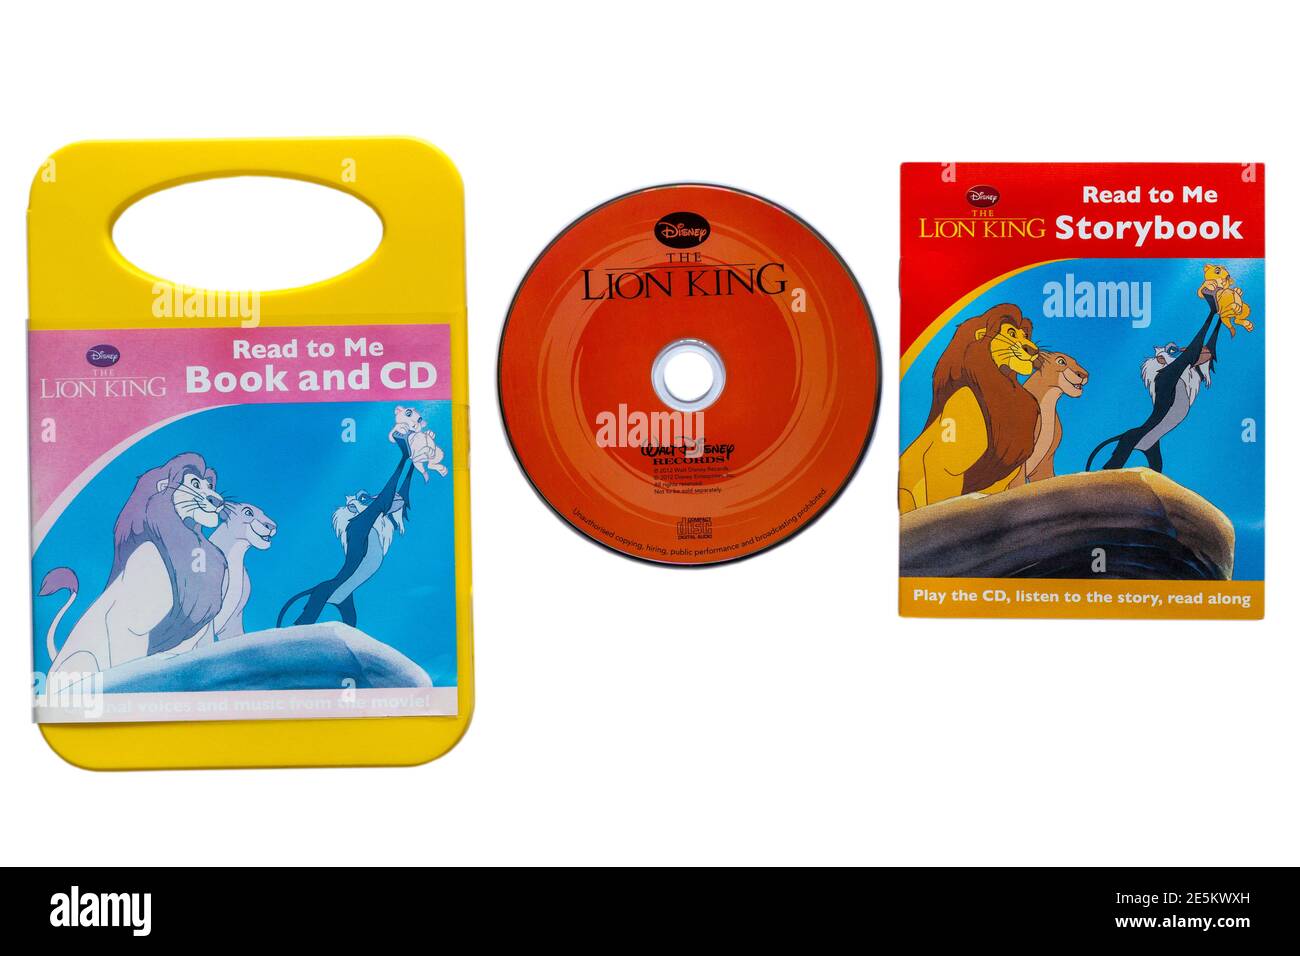 Disney Lion King Read To Me Book And Cd Removed From Case Isolated On White Background Stock Photo Alamy